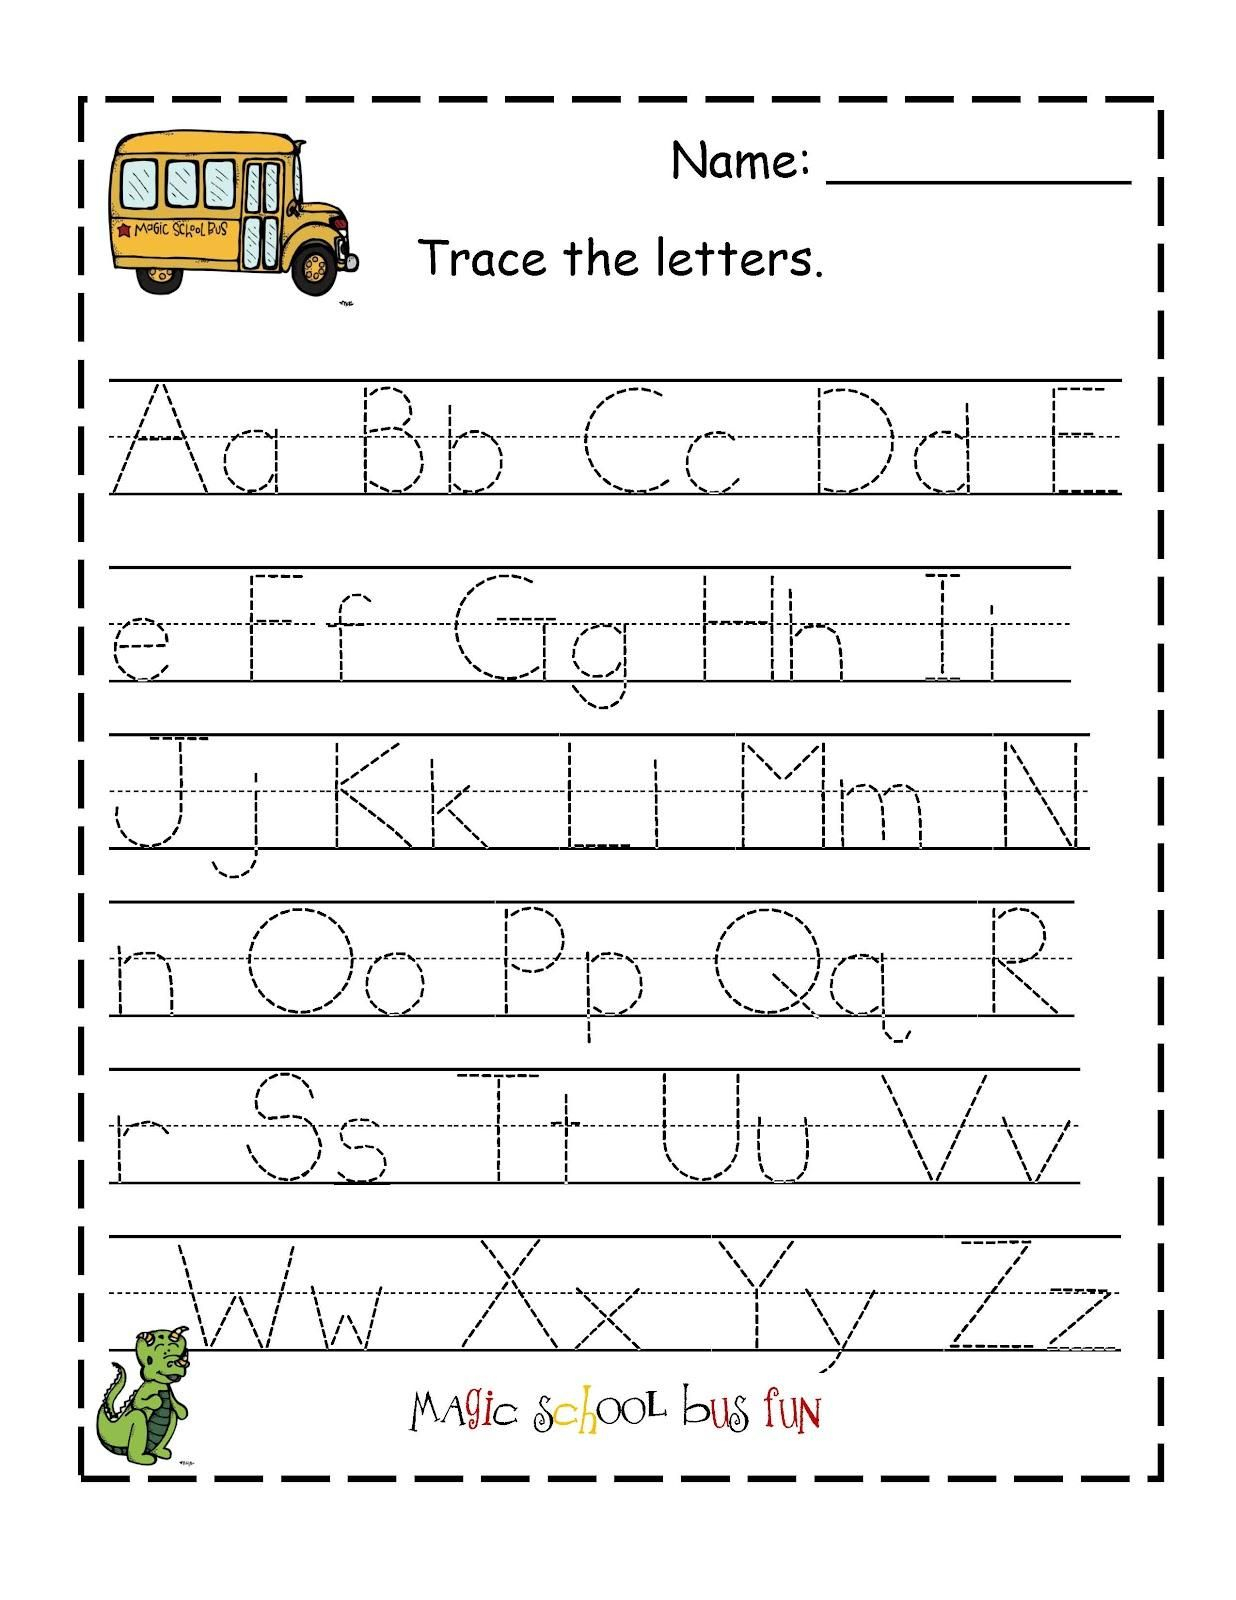 Coloring Book : Printable Letter Tracing Sheets For inside Letter Tracing Worksheets Pdf Free